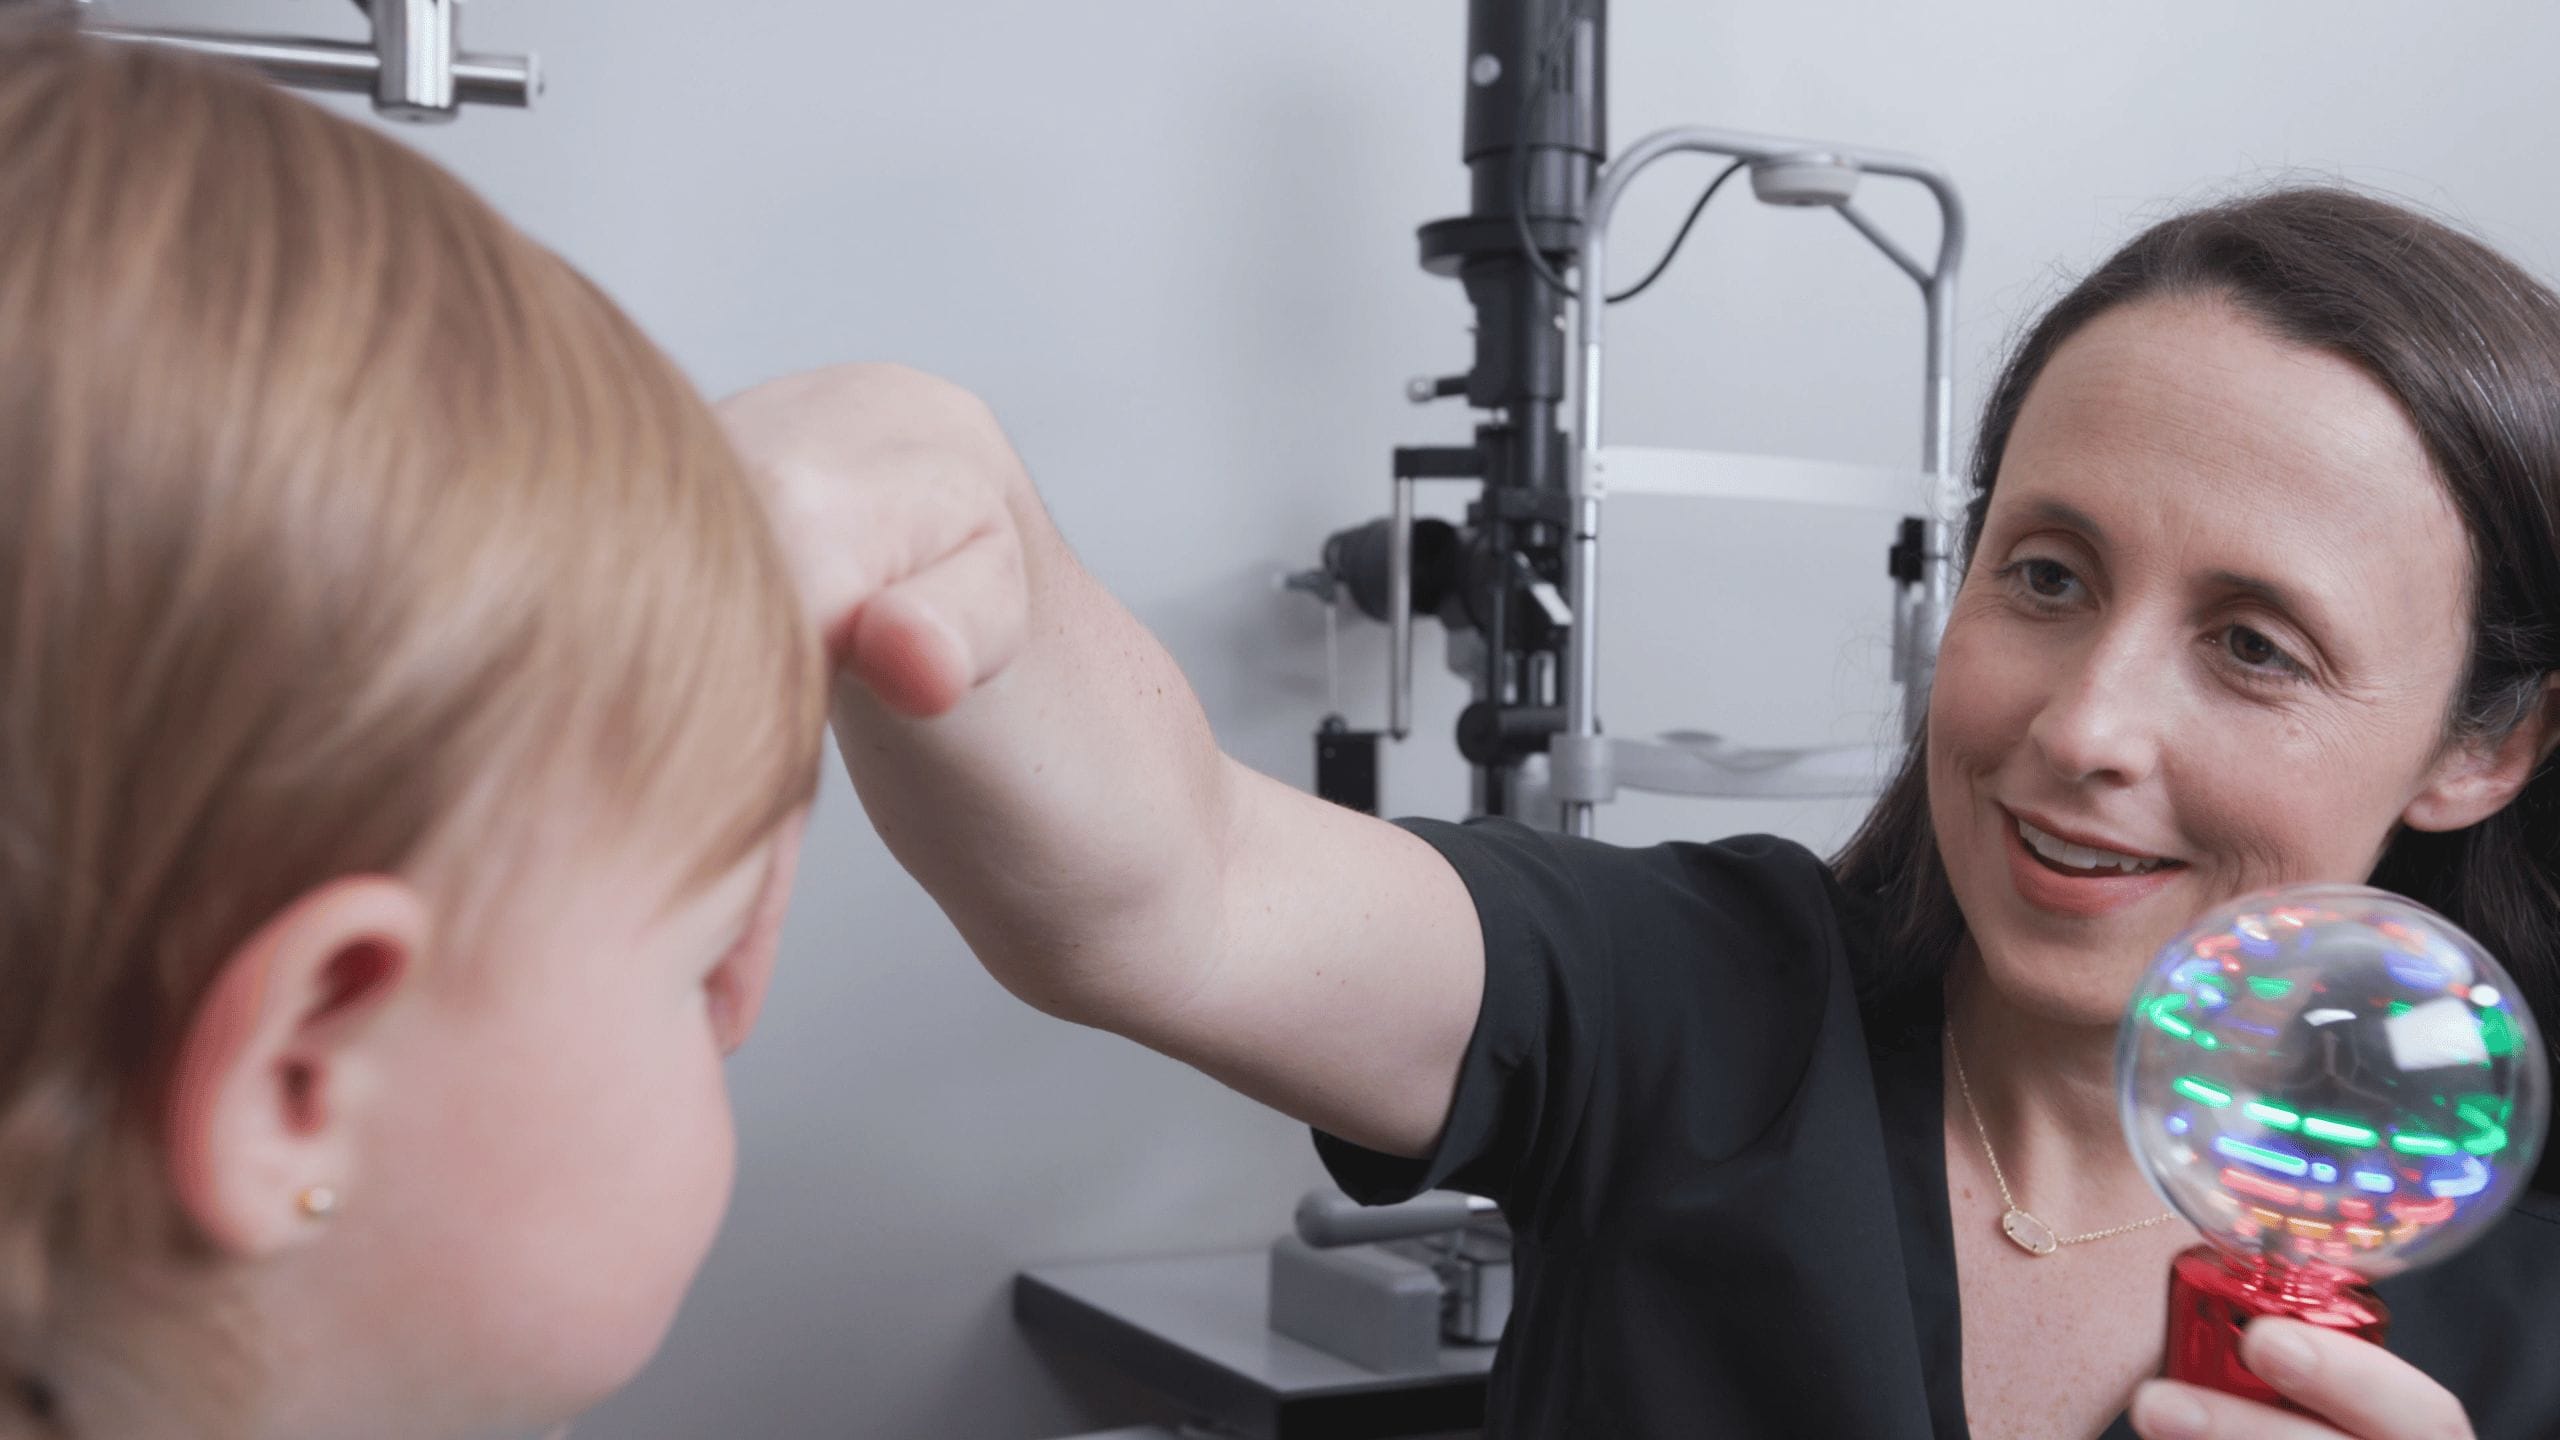 Melissa Shipley performing a child eye exam with a light-up toy